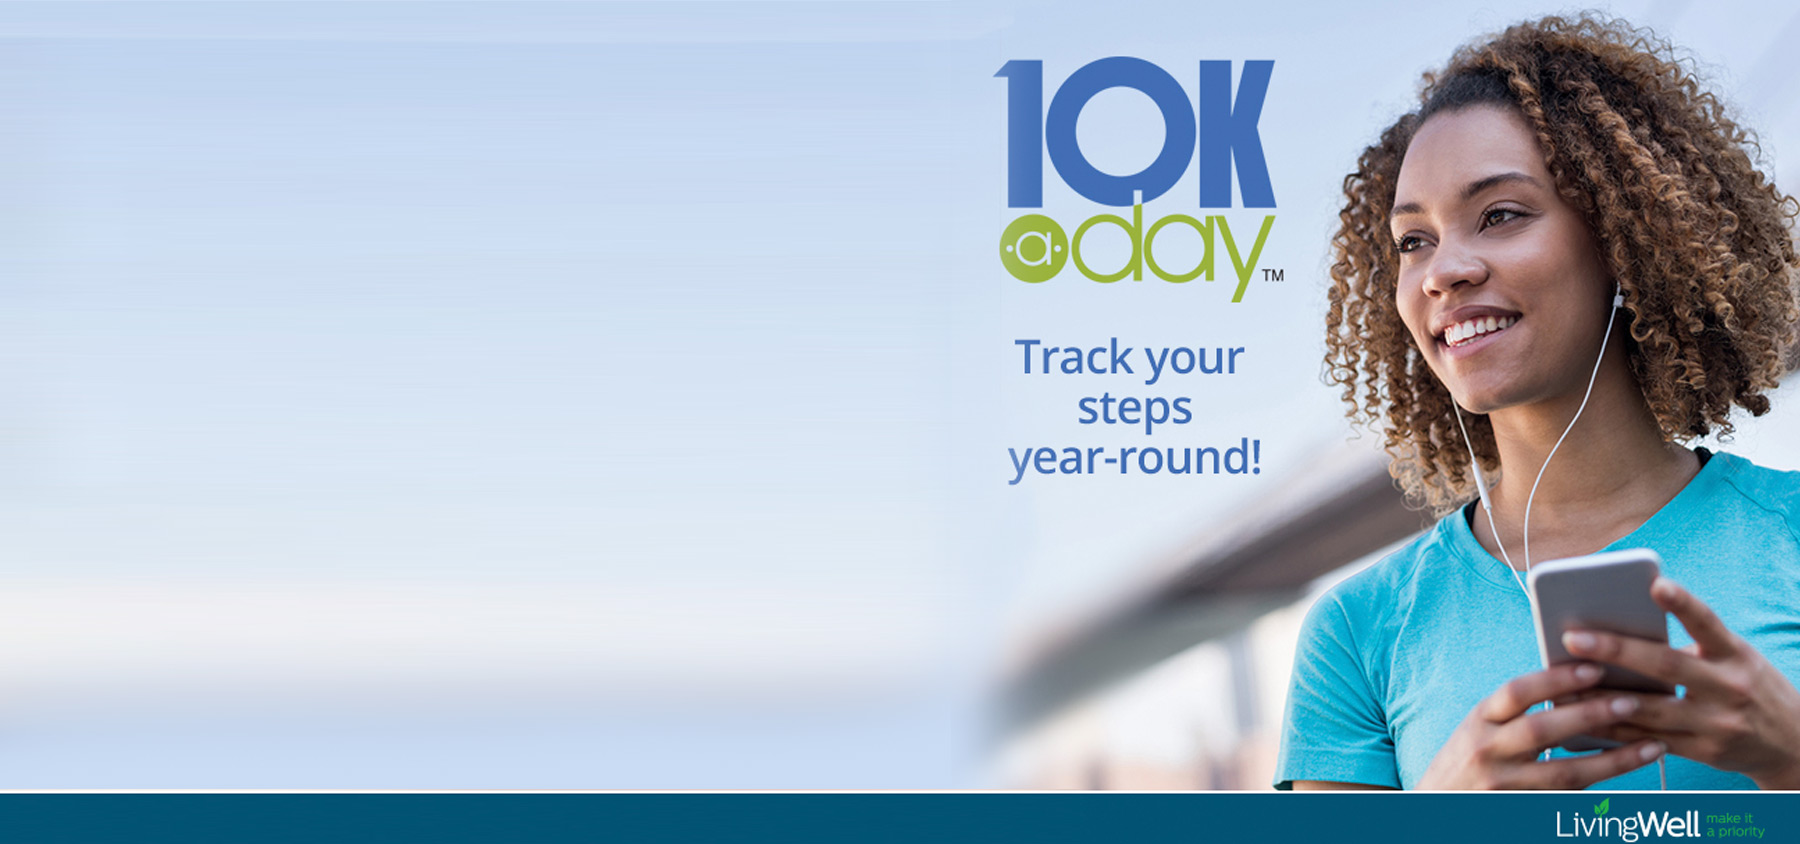 10K-A-Day Activity Tracker! Use the tracking tool to record your steps all year round. Join Us! 